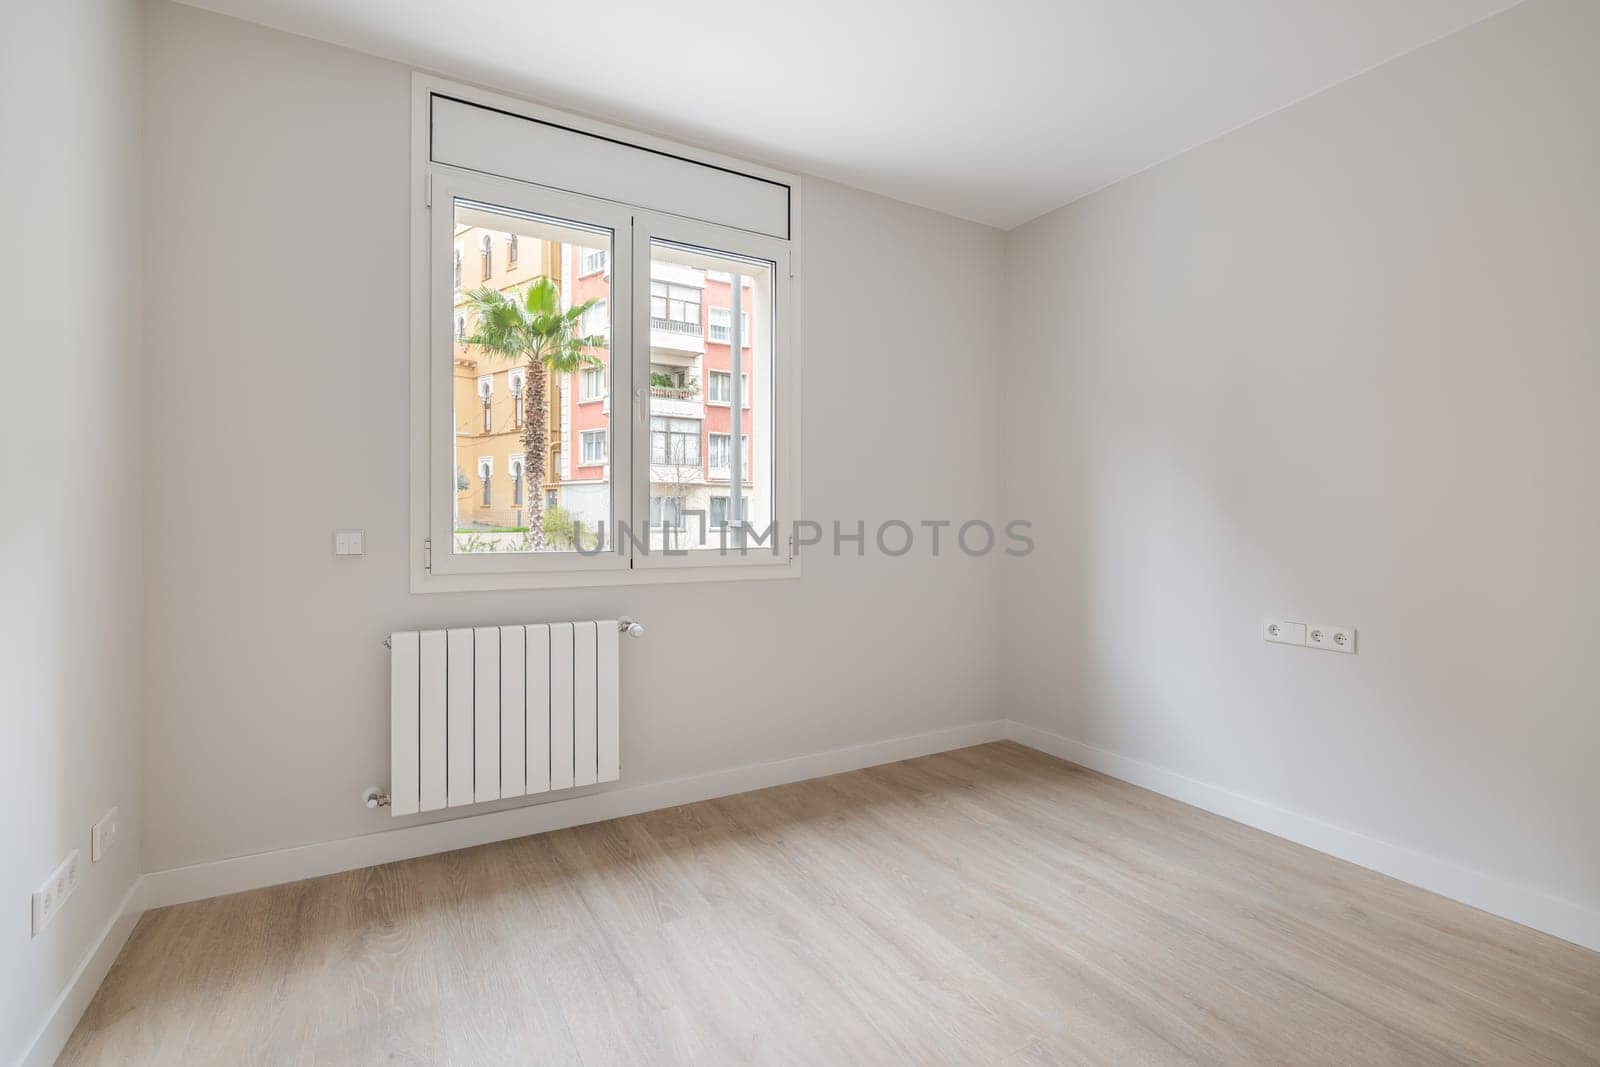 Empty white room with heating and window with city view. Interior of a modern apartment. by apavlin